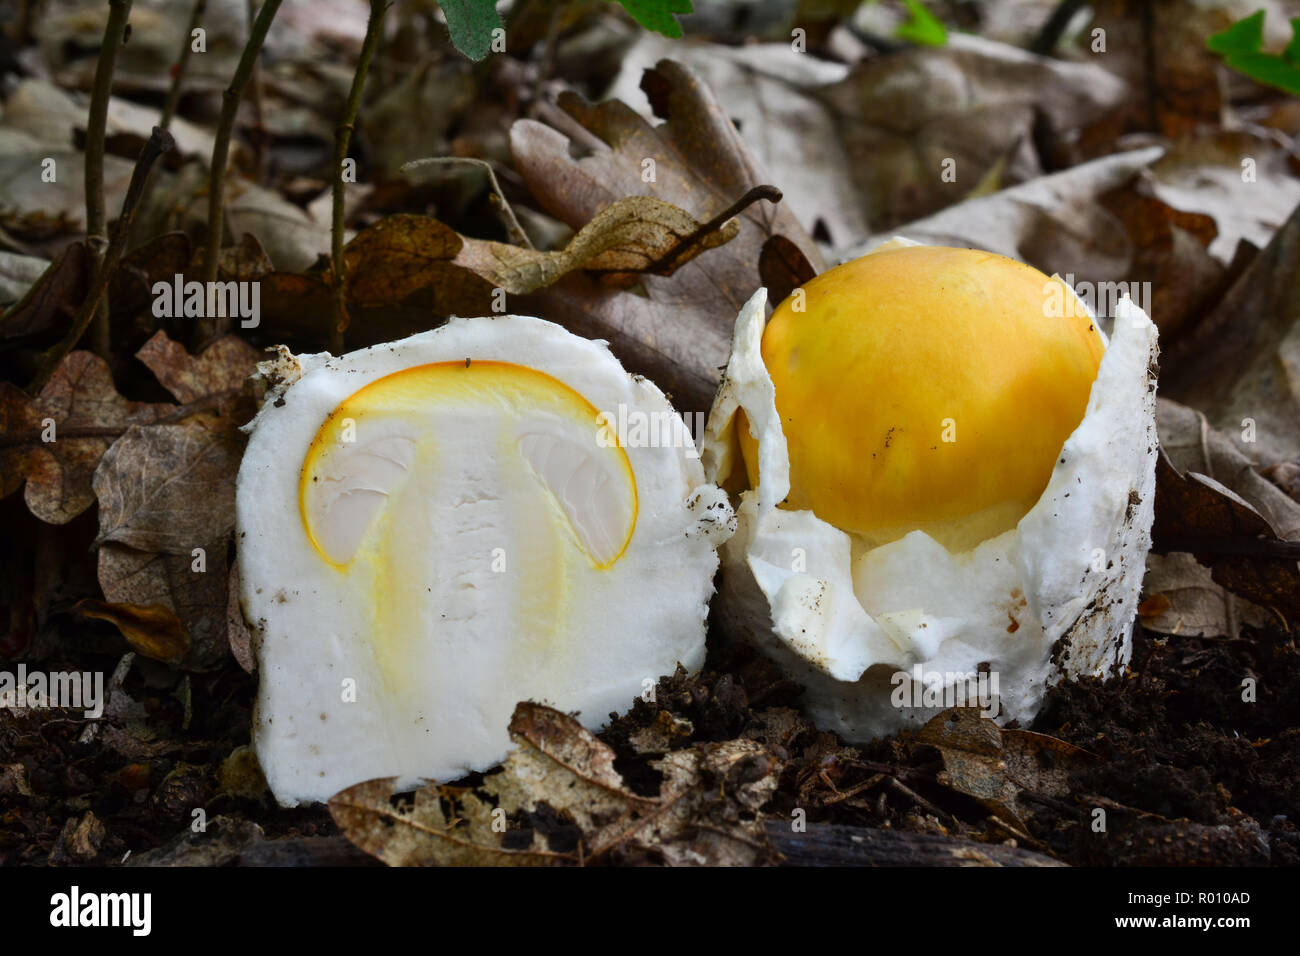 Young, nice specimen of Amanita caesarea or Caesar's mushroom in natural habitat, together with cross section of very young, still egg shaped specimen Stock Photo